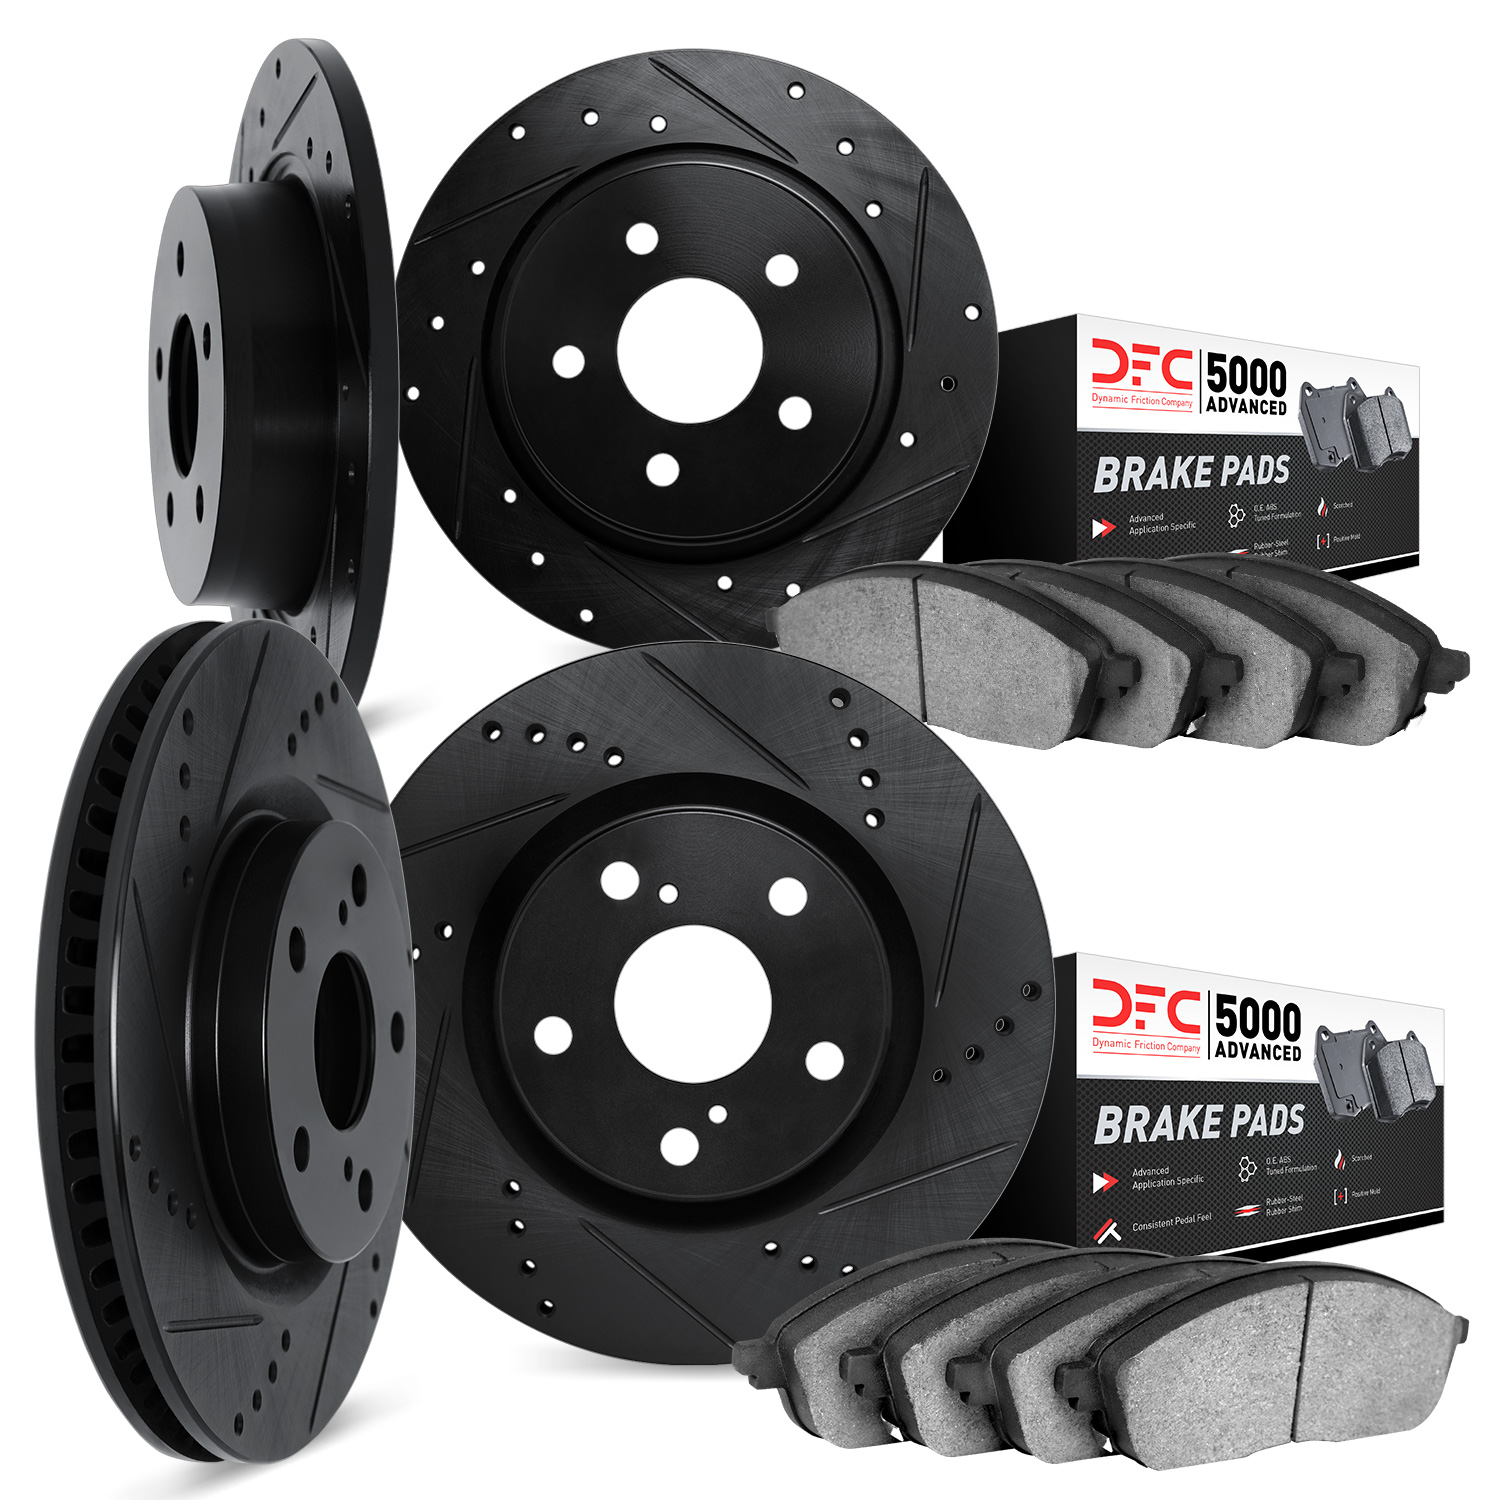 8504-67088 Drilled/Slotted Brake Rotors w/5000 Advanced Brake Pads Kit [Black], 1991-1993 Infiniti/Nissan, Position: Front and R